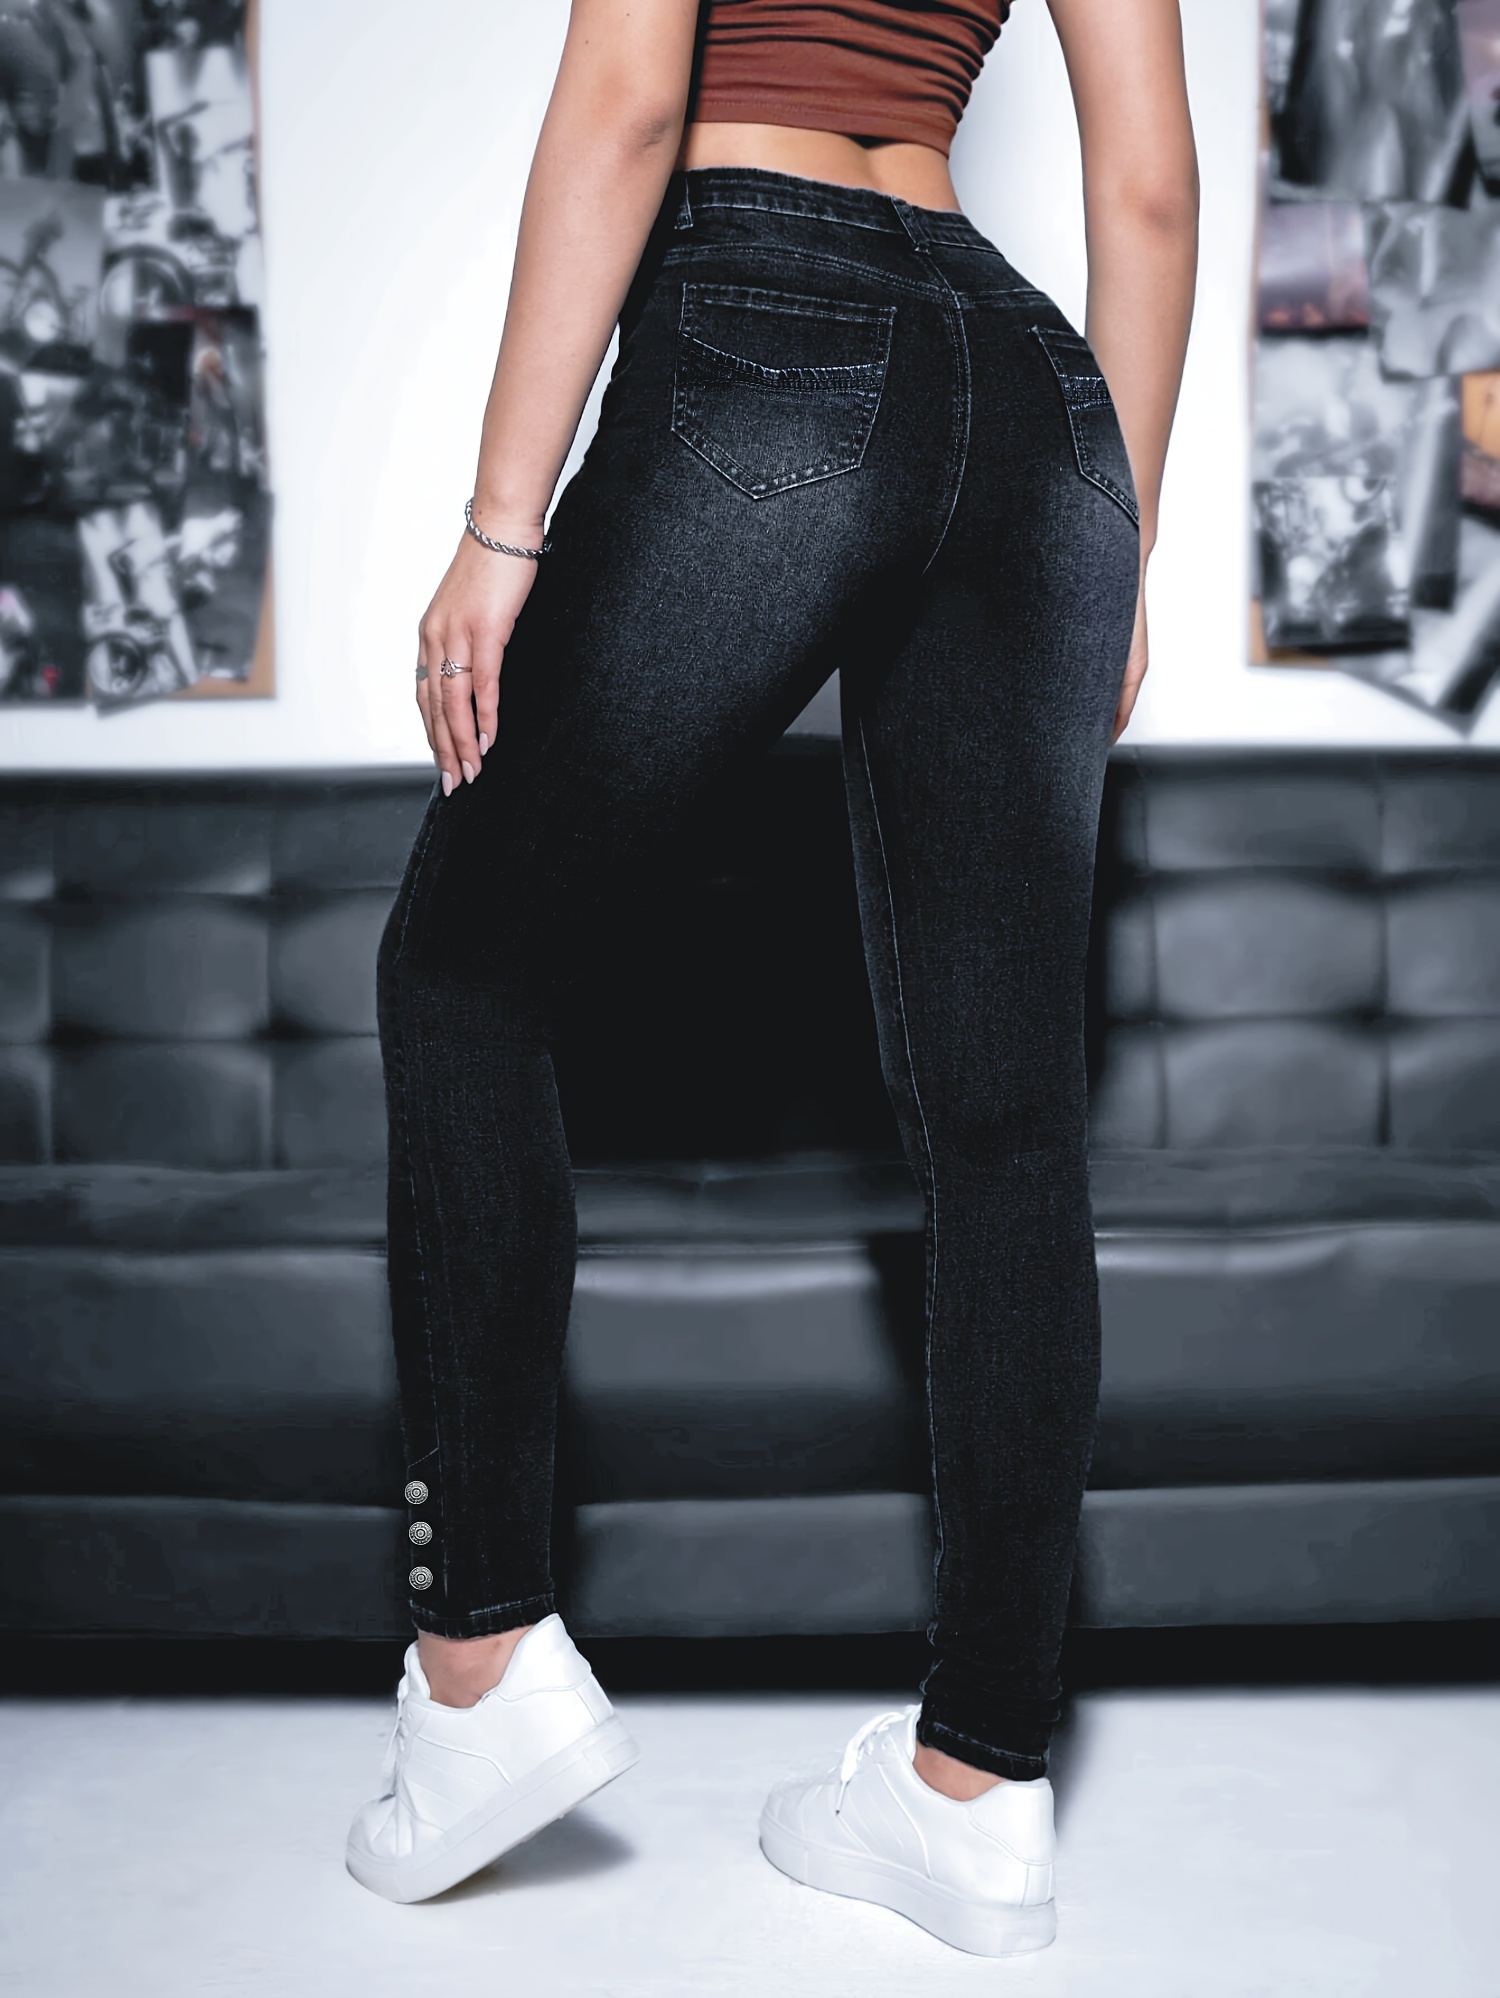 Black Ripped Holes Skinny Jeans, Slim Fit *-Stretch Side Single Breasted  Button Tight Jeans, Women's Denim Jeans & Clothing